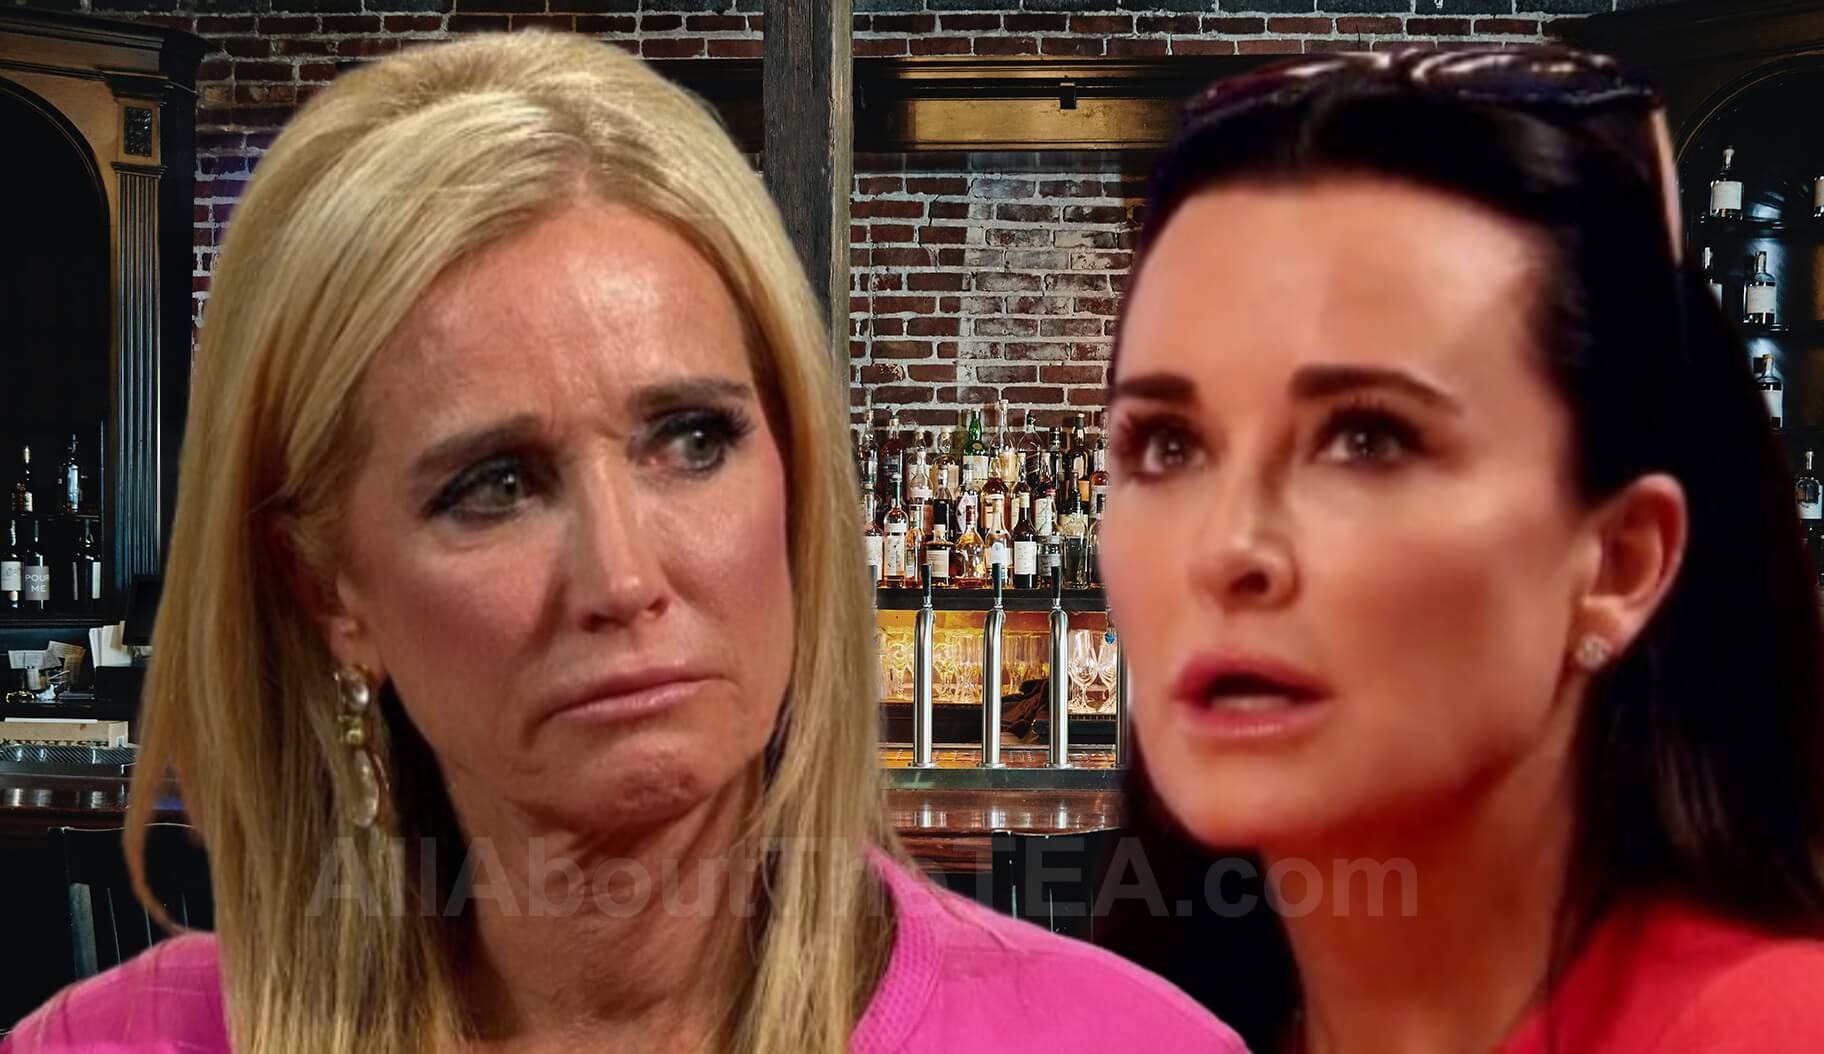 Kyle Richards FINALLY Admits She Was Not Supportive of Sister Kim Richards’ Struggle With Alcoholism!